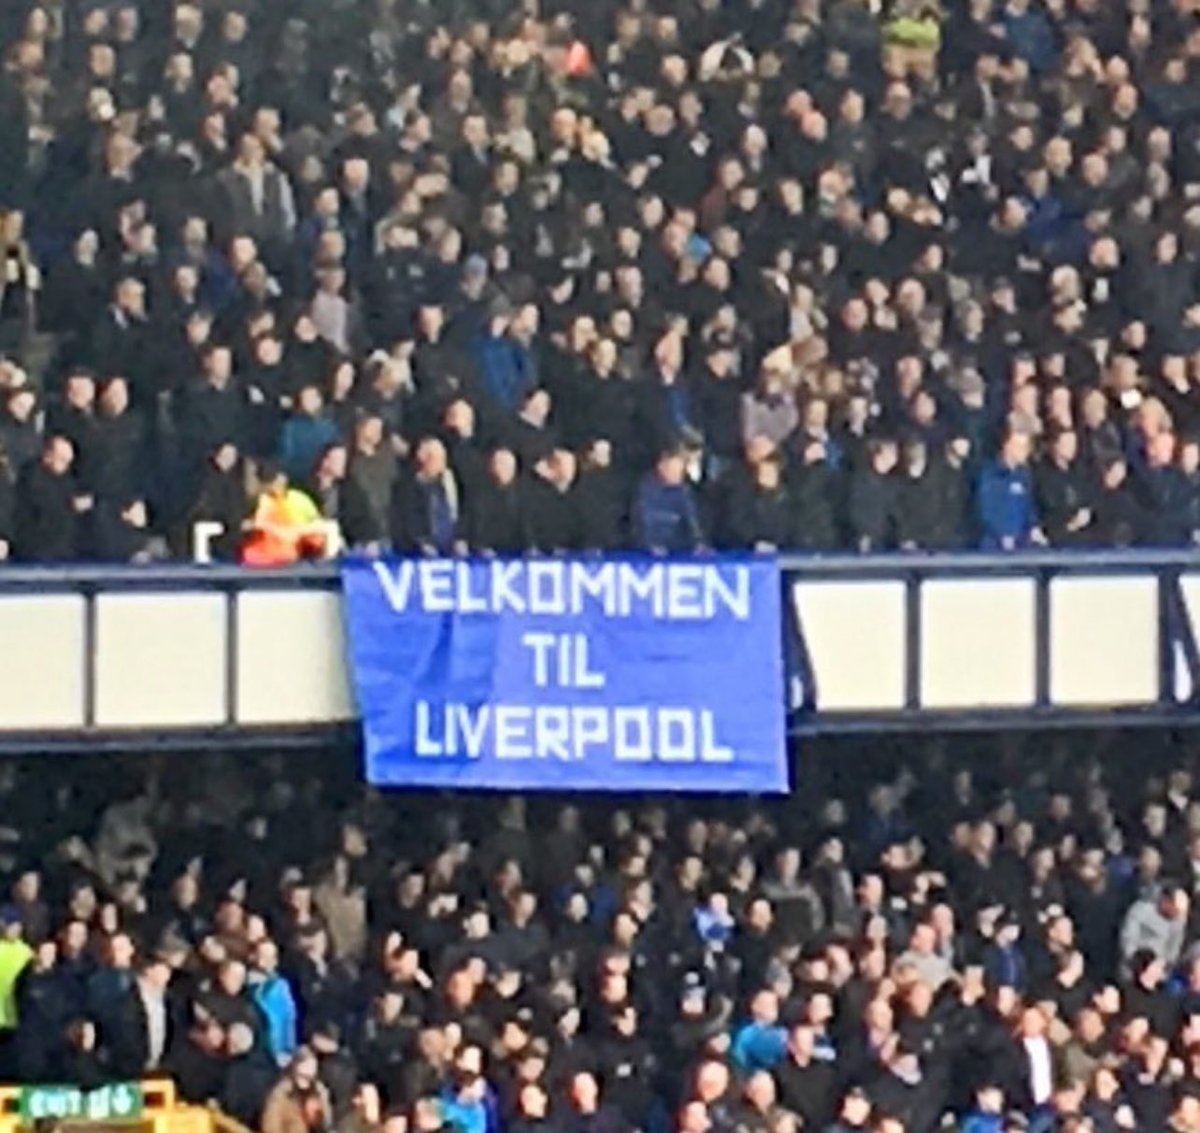 The merseyside derby is next, time to bring out this banner @The1878s. It says welcome to liverpool in Norwegian